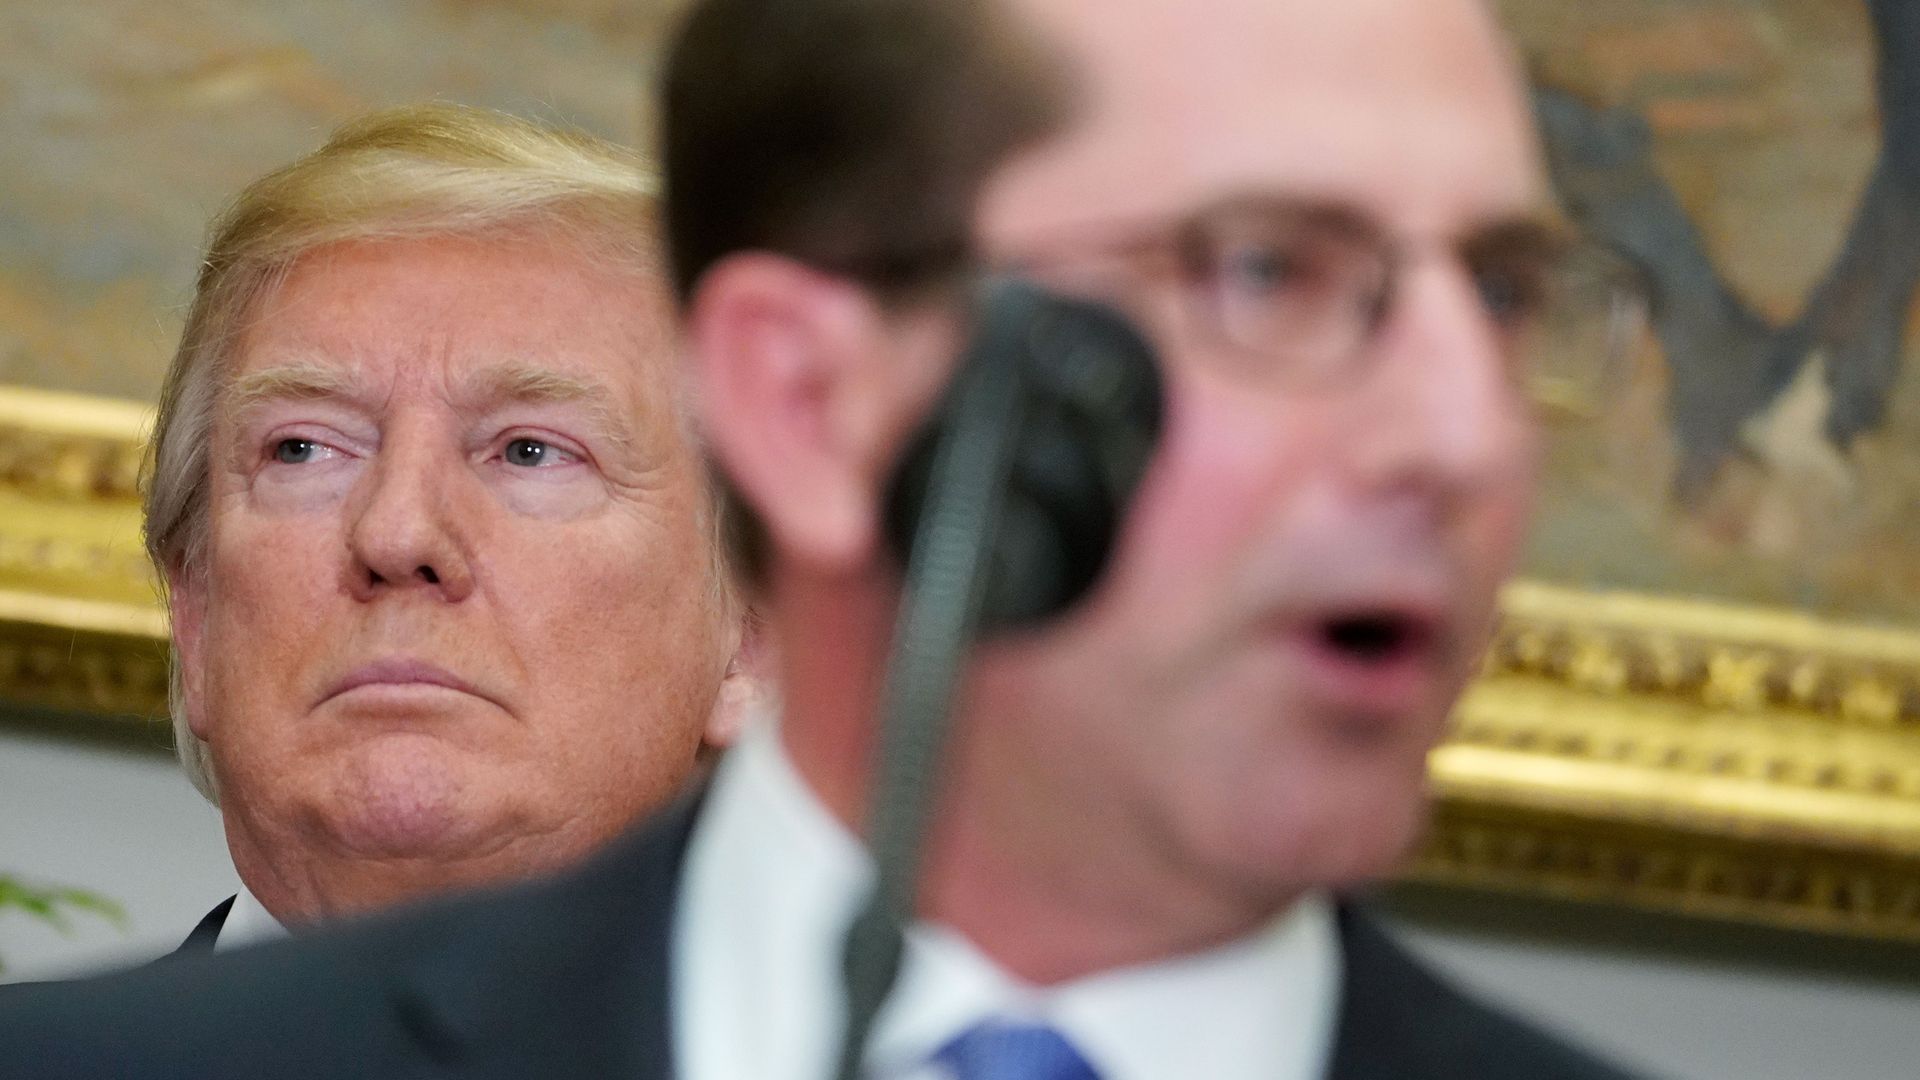 Health and Human Services Secretary Alex Azar speaks after taking the oath of office watched by US President Donald Trump 